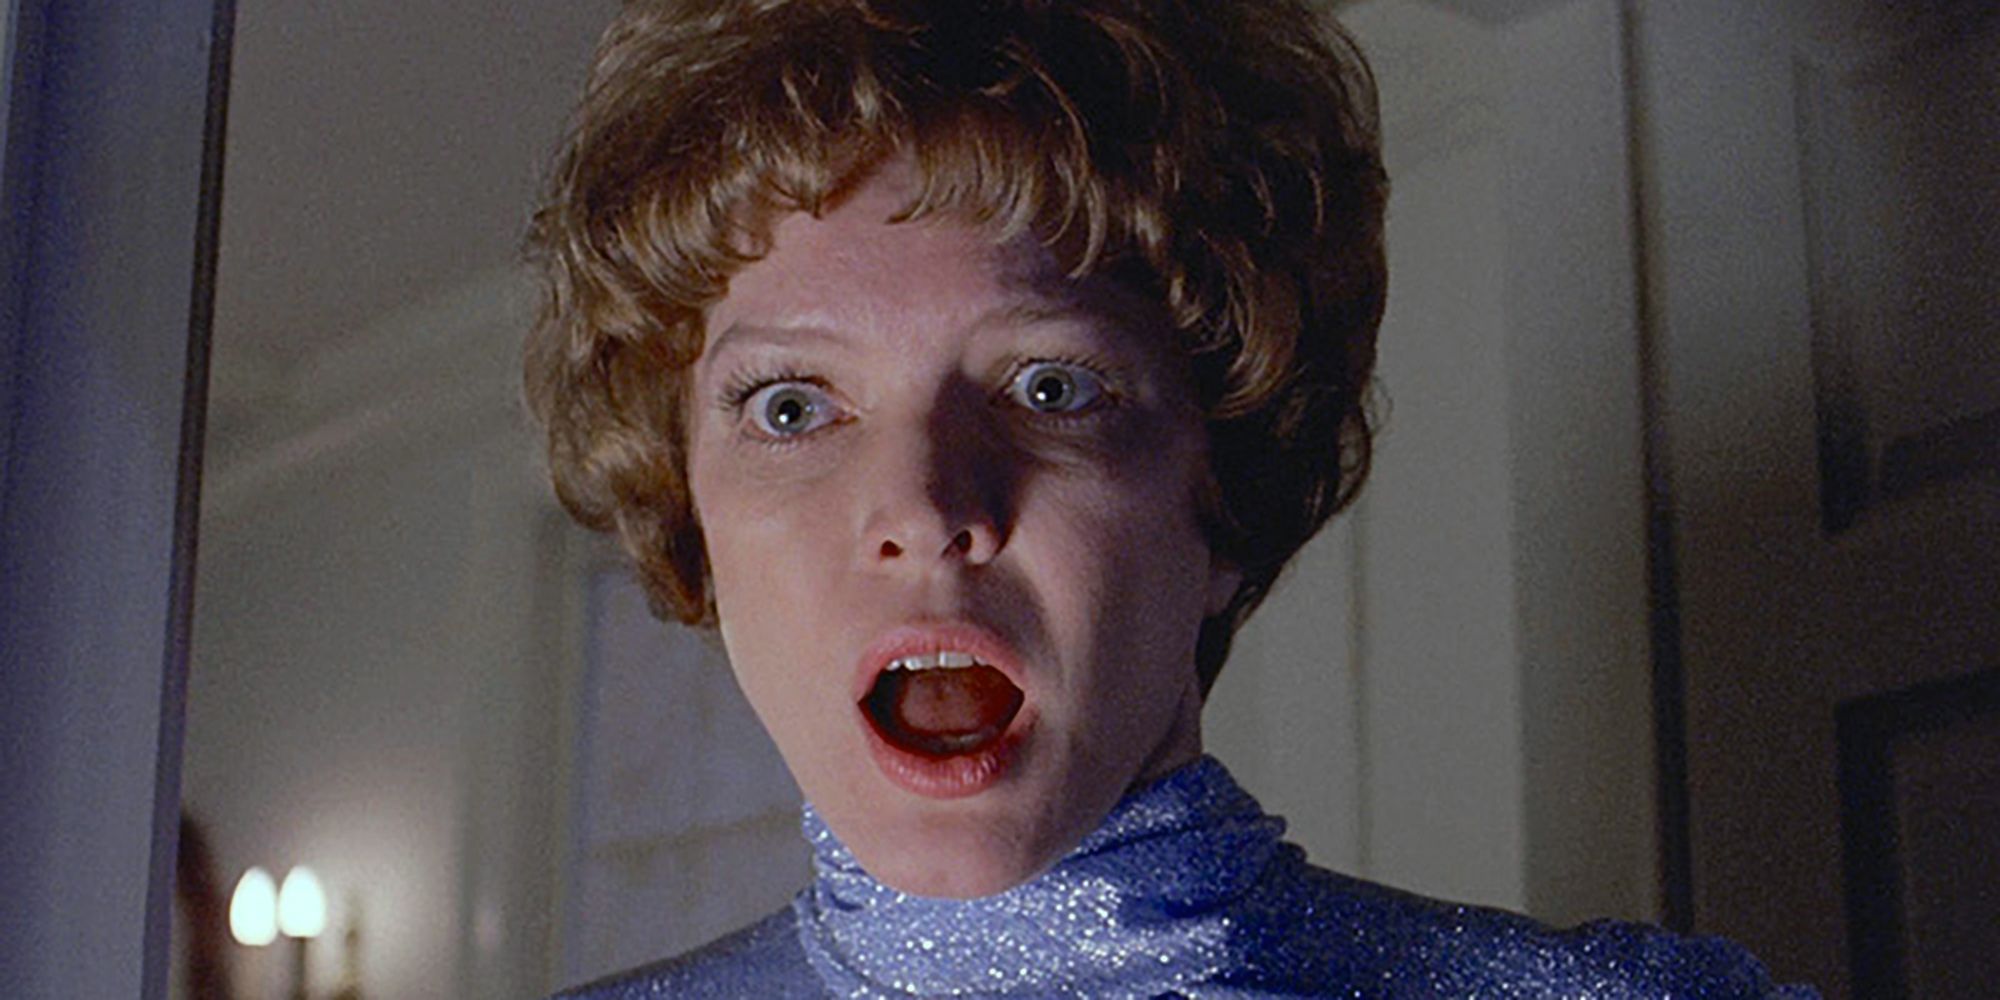 Ellen Burstyn as Chris McNeill opening her mouth in horror in the film The Exorcist.